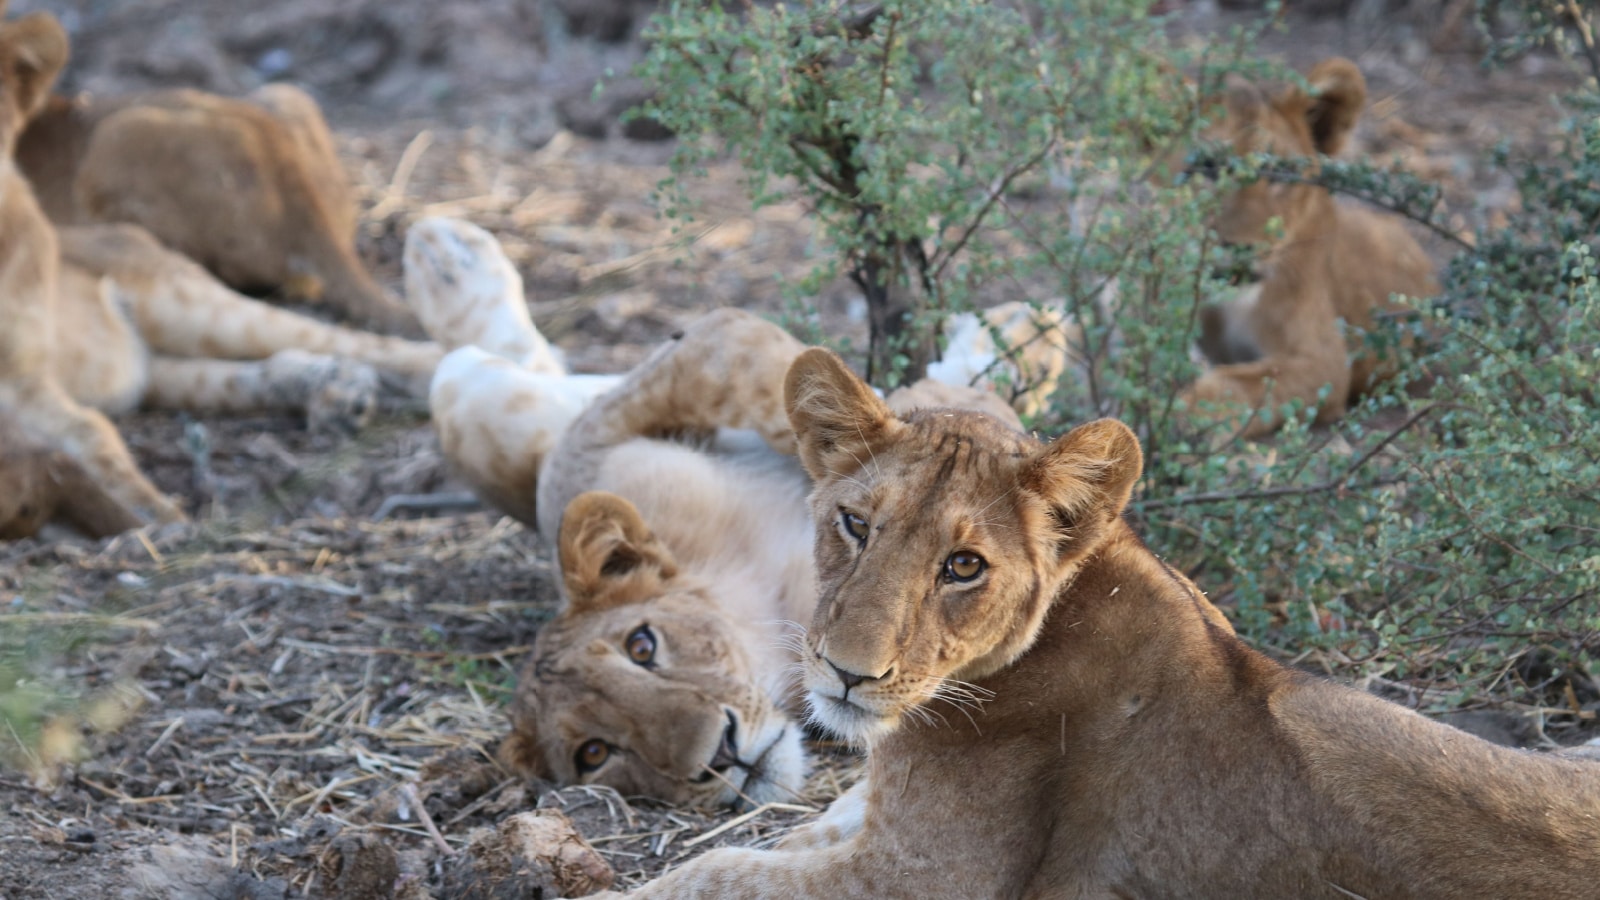 Lion cub with paws in air surrounded by other lion cubs in Zakouma National Park, Chad